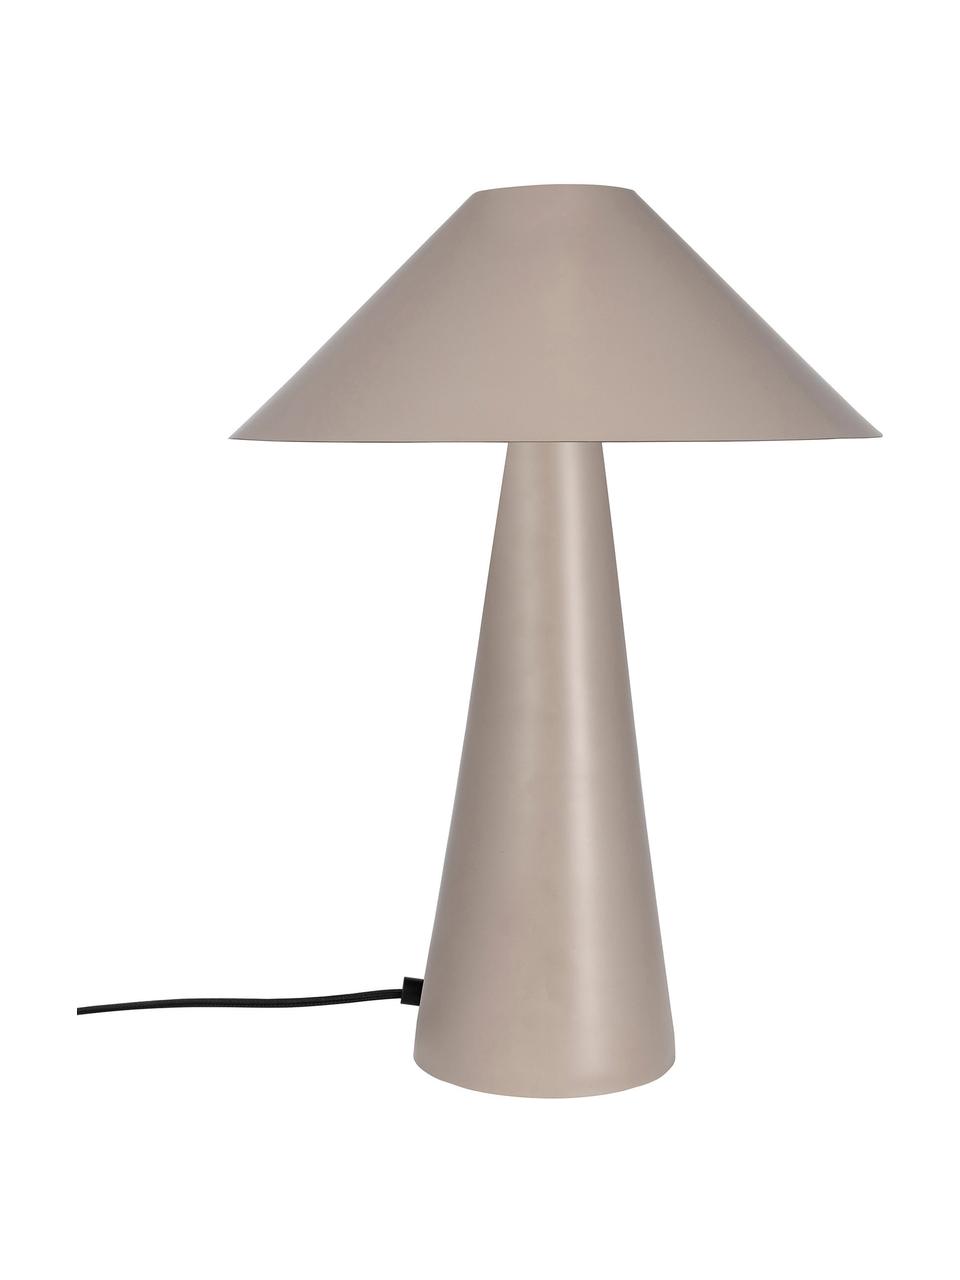 Design Tischlampe Cannes in Taupe, Lampenschirm: Metall, beschichtet, Lampenfuß: Metall, beschichtet, Taupe, Ø 30 x H 47 cm